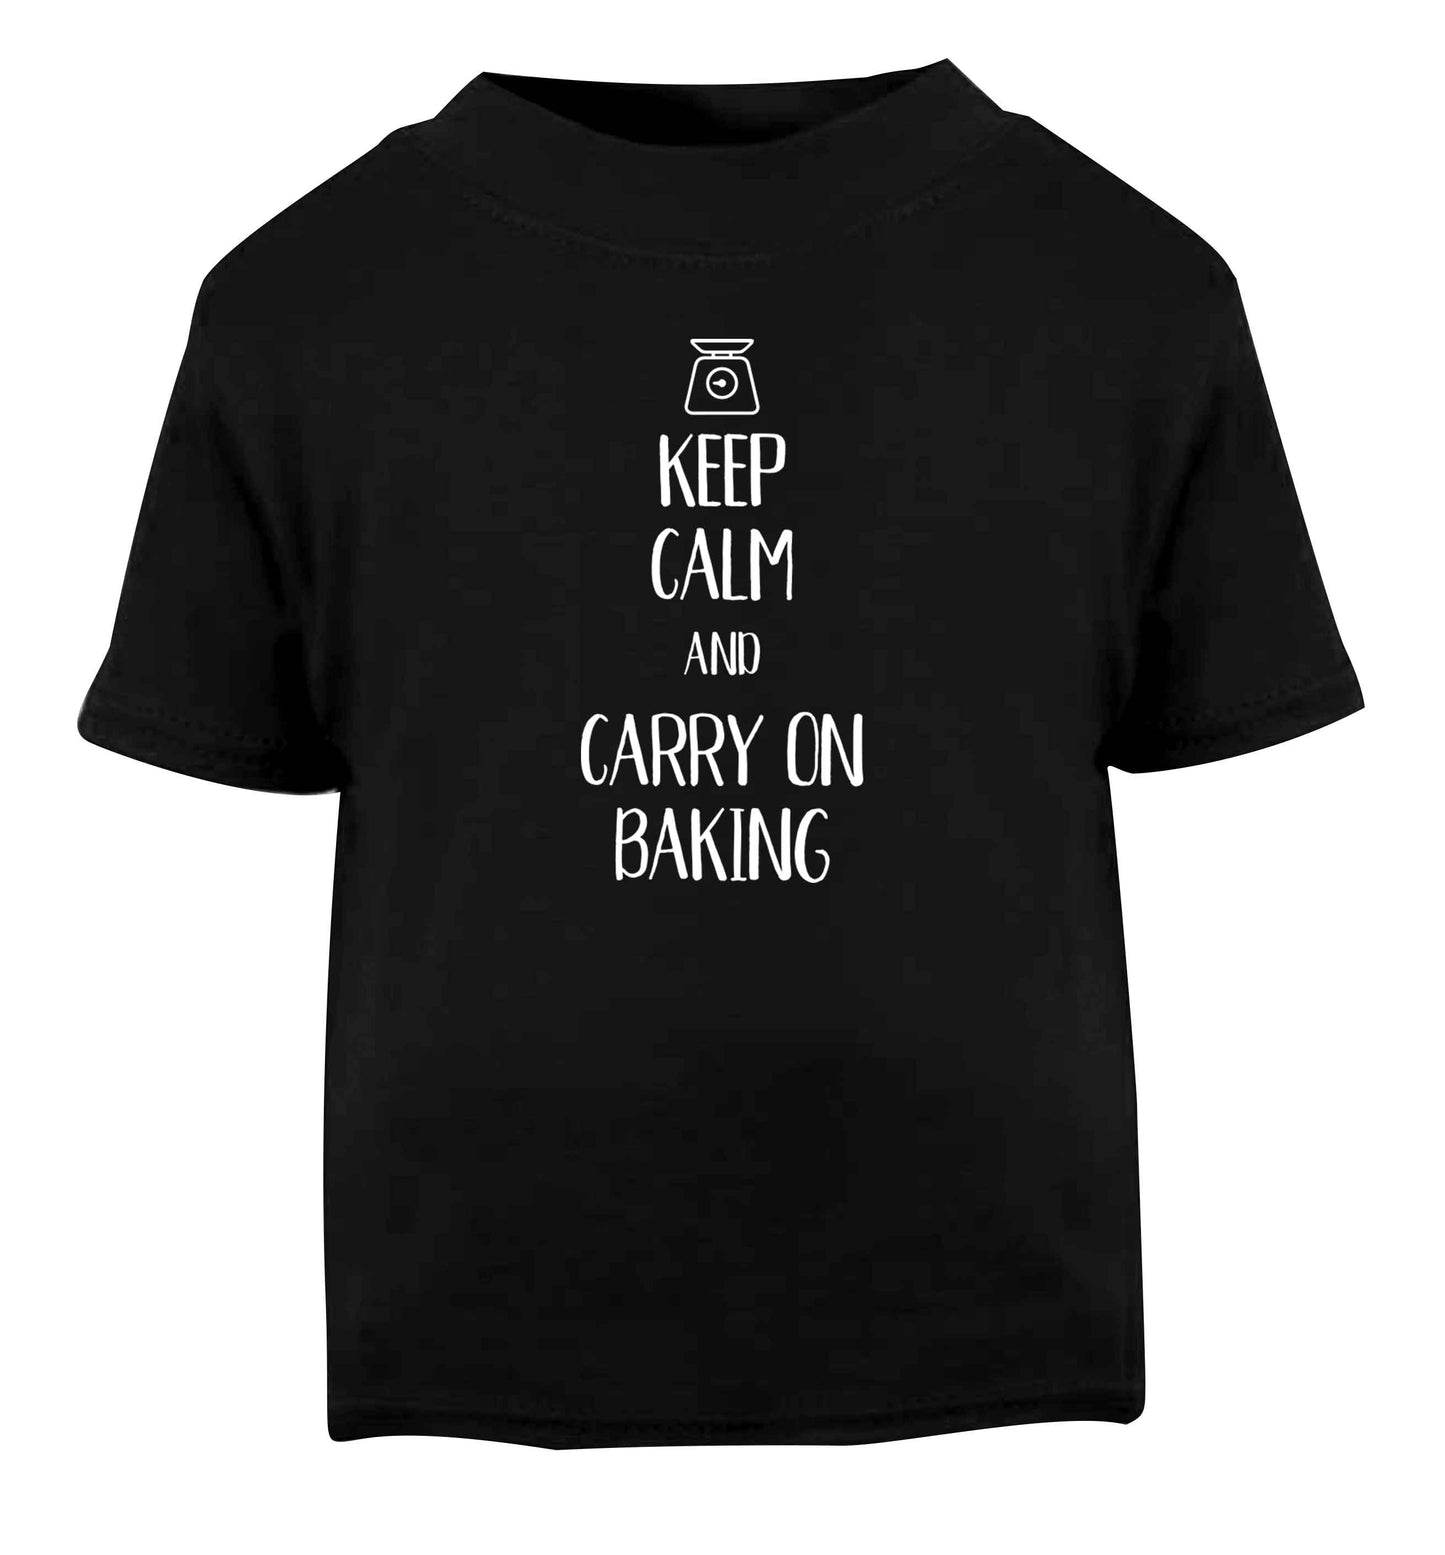 Keep calm and carry on baking Black Baby Toddler Tshirt 2 years